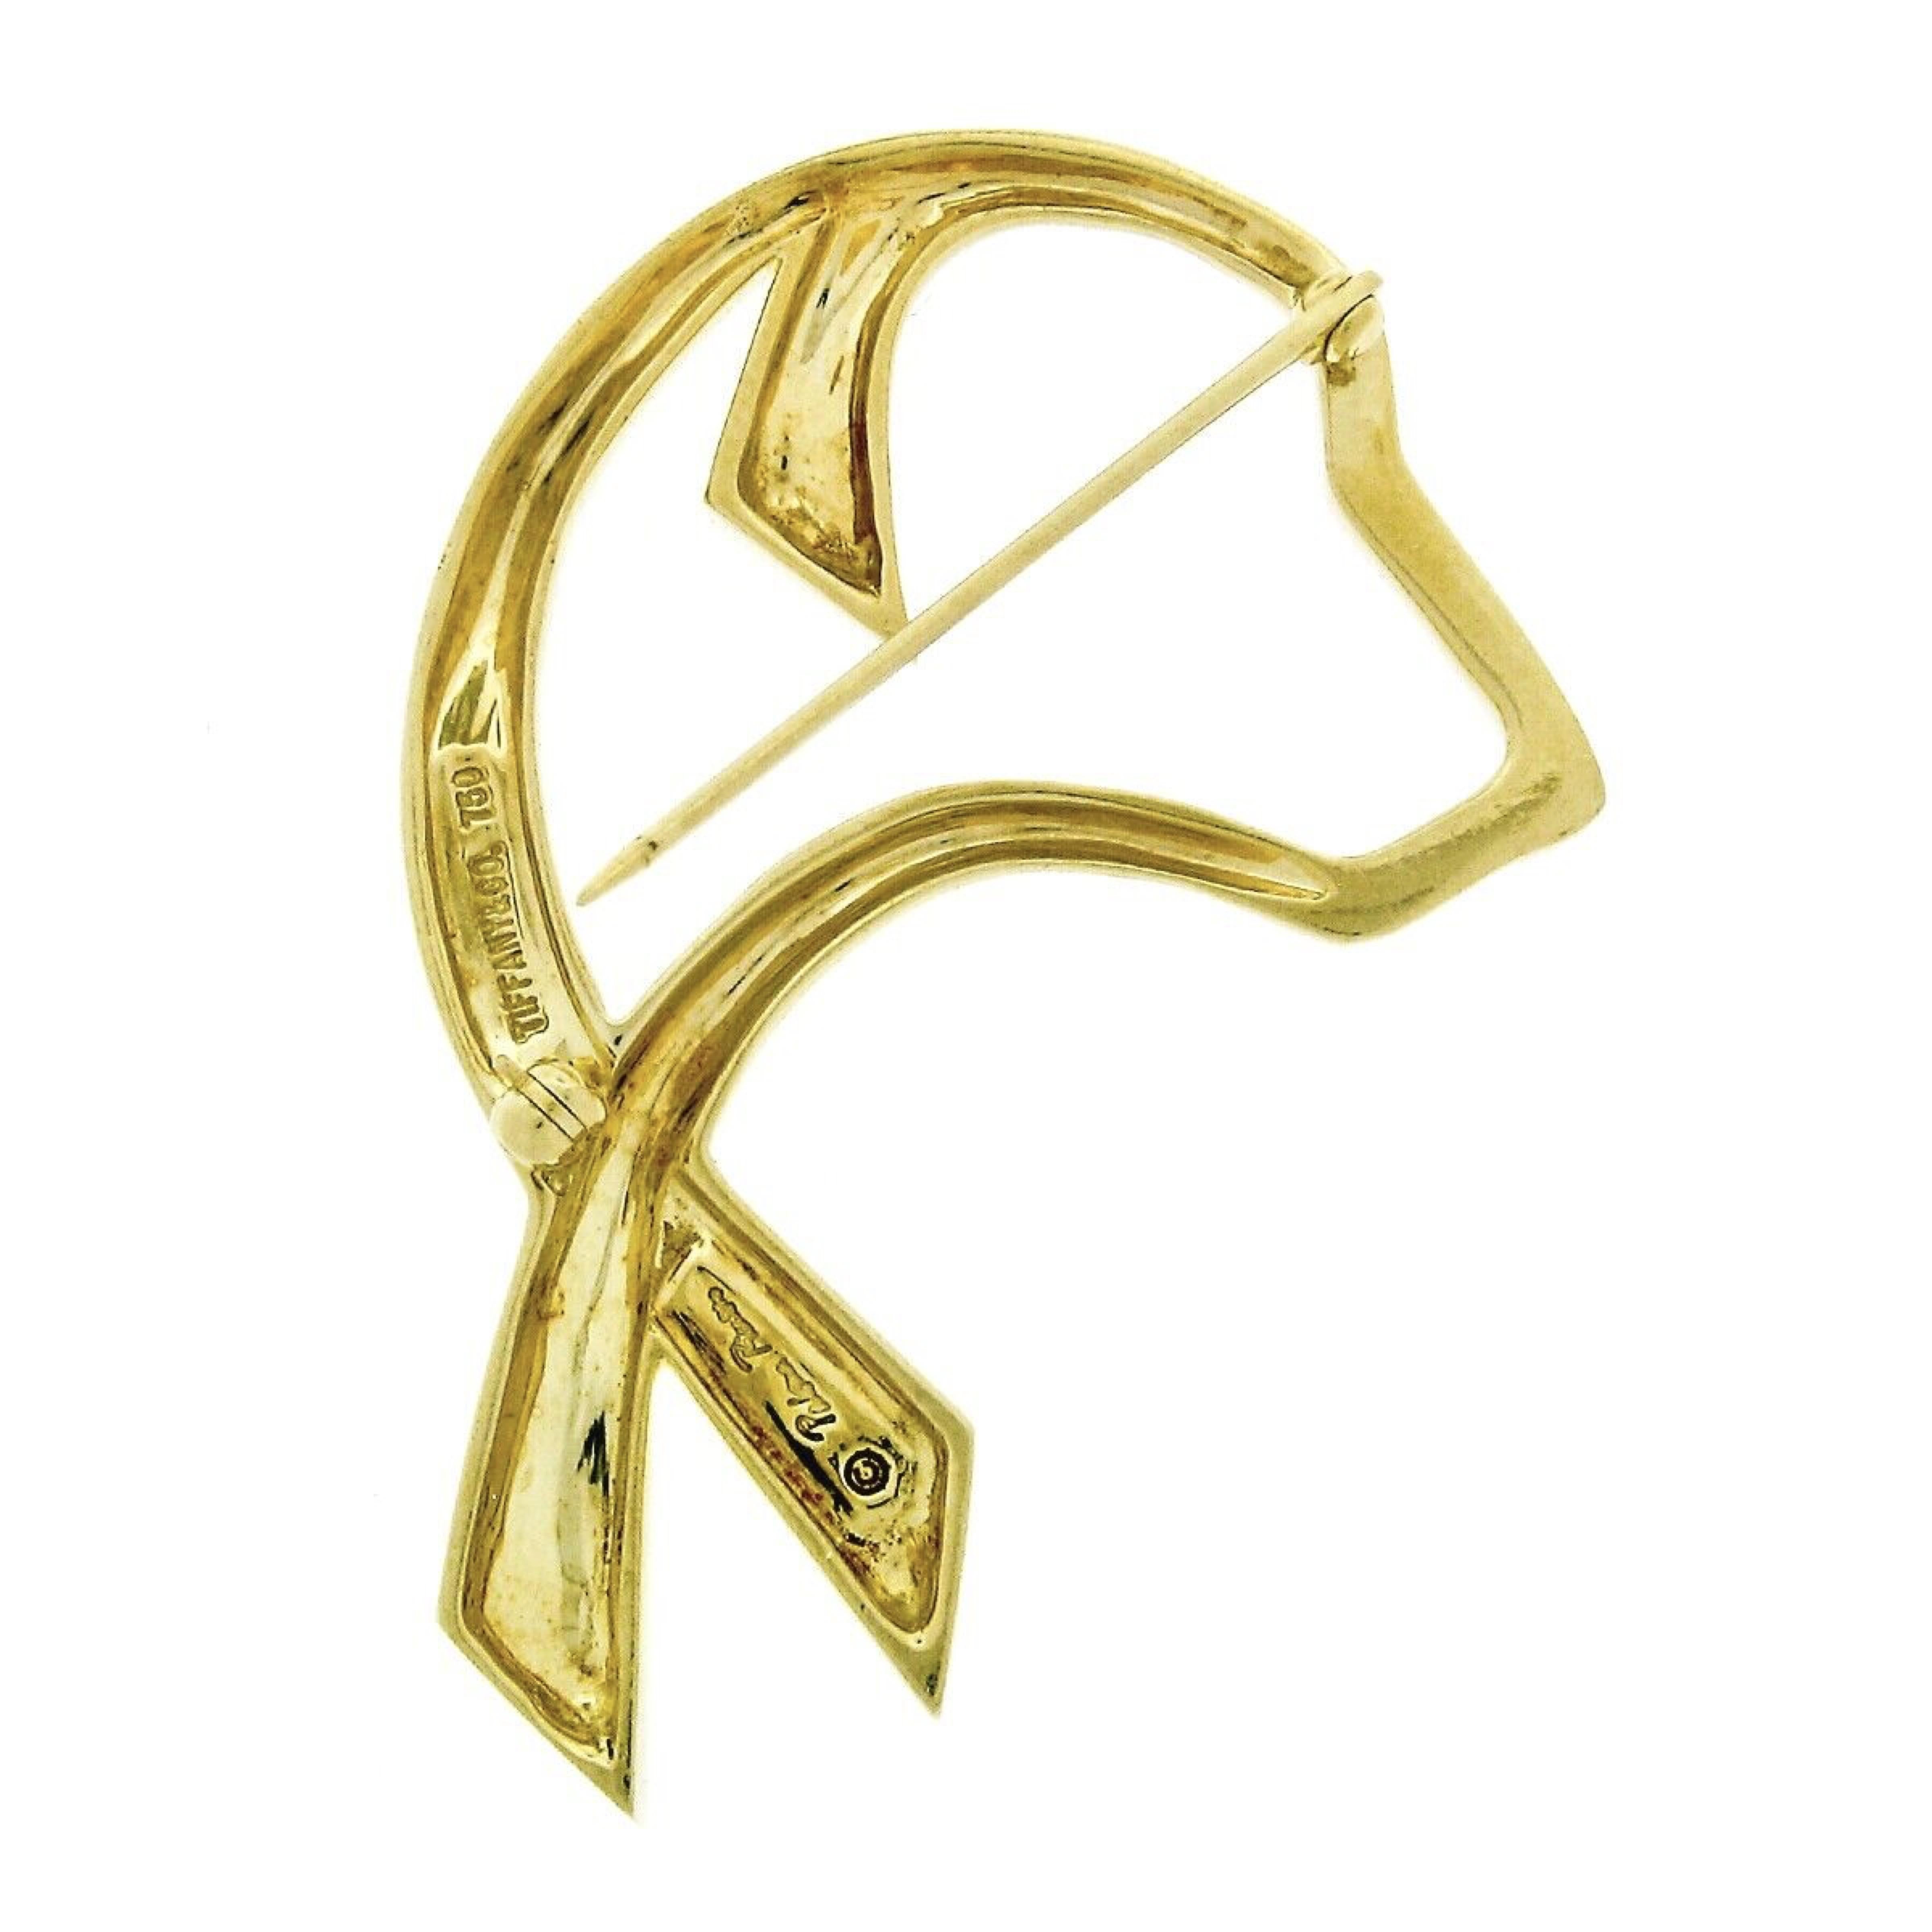 Tiffany & Co. Paloma Picasso Graffiti 18k Yellow Gold Open Dog Ribbon Brooch Pin In Excellent Condition For Sale In Montclair, NJ